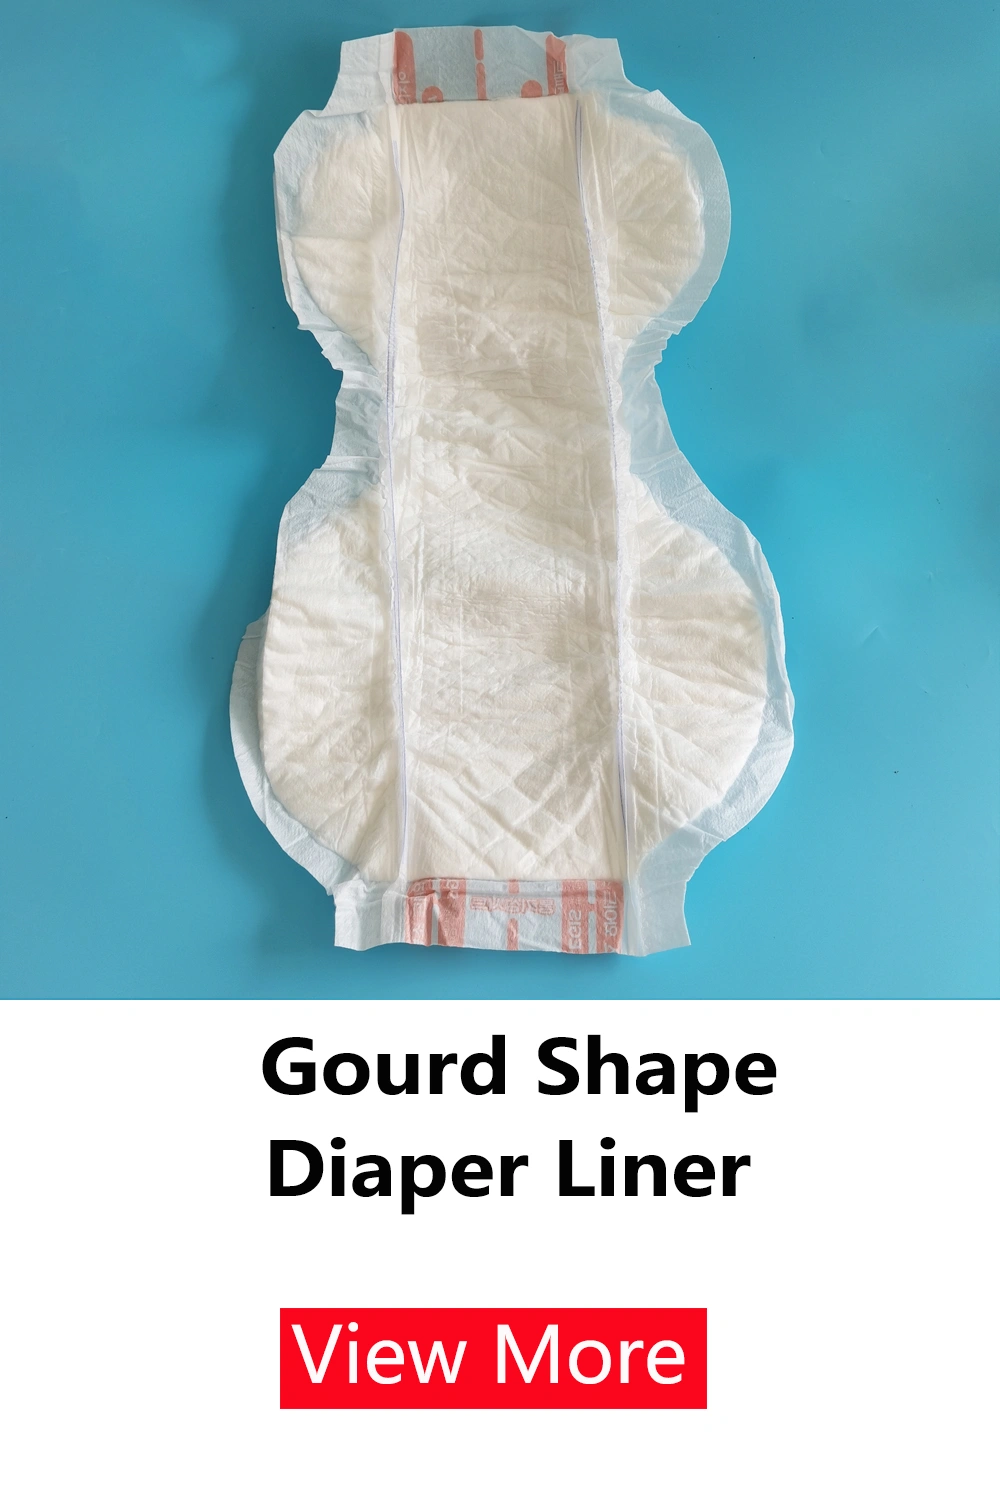 Hygiene Pet Training & Puppy Mats and 8 shape diaper liner picture